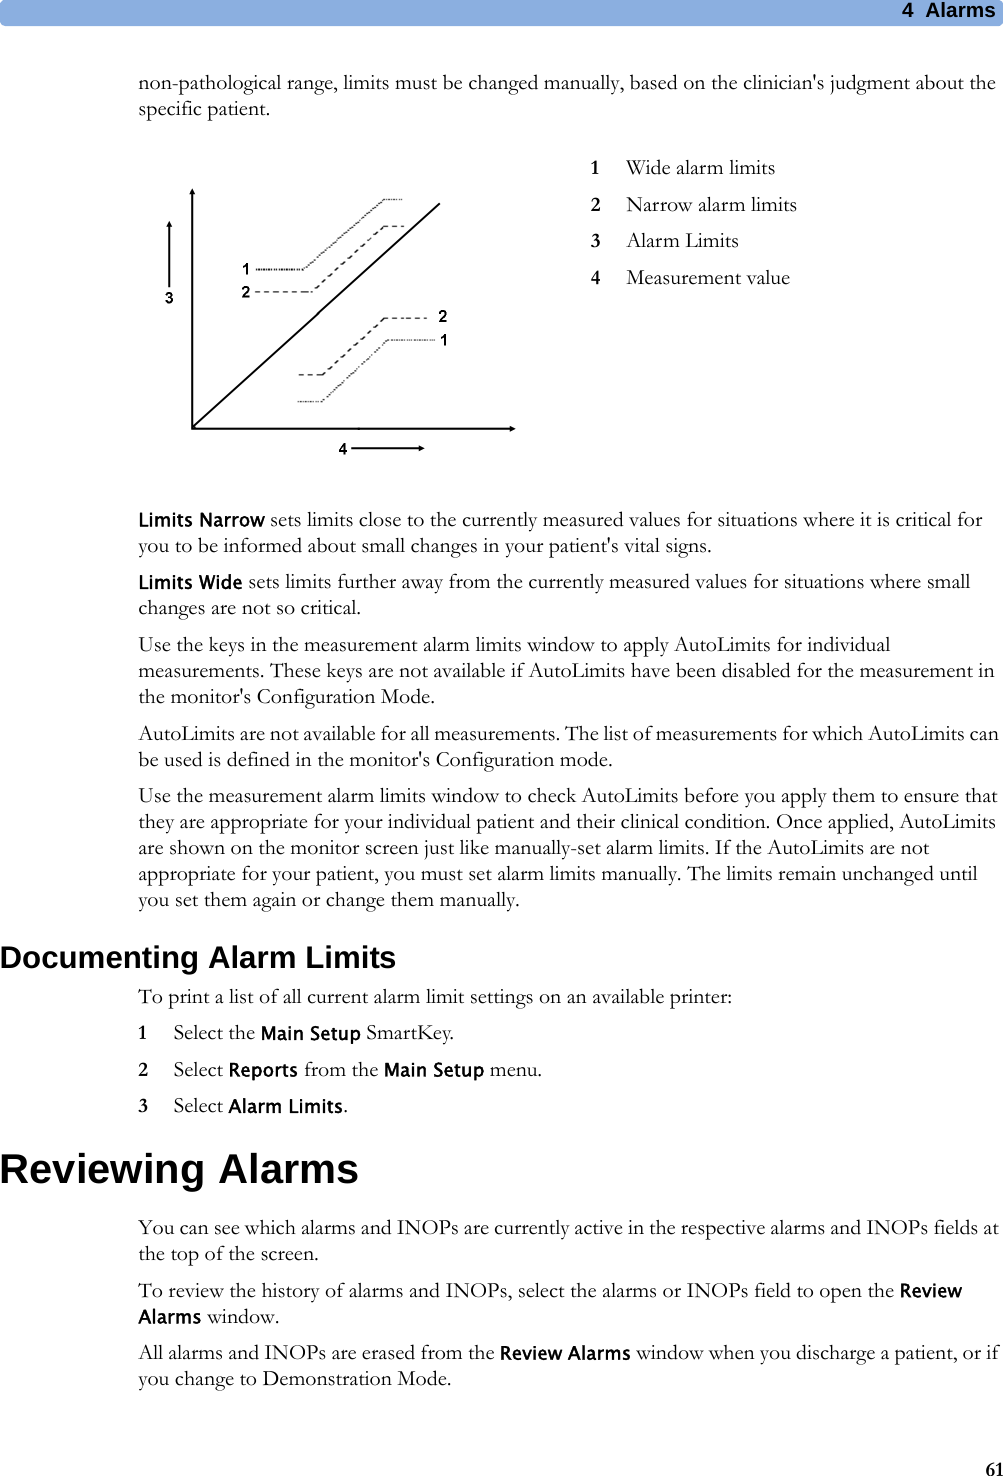 4 Alarms61non-pathological range, limits must be changed manually, based on the clinician&apos;s judgment about the specific patient.Limits Narrow sets limits close to the currently measured values for situations where it is critical for you to be informed about small changes in your patient&apos;s vital signs.Limits Wide sets limits further away from the currently measured values for situations where small changes are not so critical.Use the keys in the measurement alarm limits window to apply AutoLimits for individual measurements. These keys are not available if AutoLimits have been disabled for the measurement in the monitor&apos;s Configuration Mode.AutoLimits are not available for all measurements. The list of measurements for which AutoLimits can be used is defined in the monitor&apos;s Configuration mode.Use the measurement alarm limits window to check AutoLimits before you apply them to ensure that they are appropriate for your individual patient and their clinical condition. Once applied, AutoLimits are shown on the monitor screen just like manually-set alarm limits. If the AutoLimits are not appropriate for your patient, you must set alarm limits manually. The limits remain unchanged until you set them again or change them manually.Documenting Alarm LimitsTo print a list of all current alarm limit settings on an available printer:1Select the Main Setup SmartKey.2Select Reports from the Main Setup menu.3Select Alarm Limits.Reviewing AlarmsYou can see which alarms and INOPs are currently active in the respective alarms and INOPs fields at the top of the screen.To review the history of alarms and INOPs, select the alarms or INOPs field to open the Review Alarms window.All alarms and INOPs are erased from the Review Alarms window when you discharge a patient, or if you change to Demonstration Mode.1Wide alarm limits2Narrow alarm limits3Alarm Limits4Measurement value